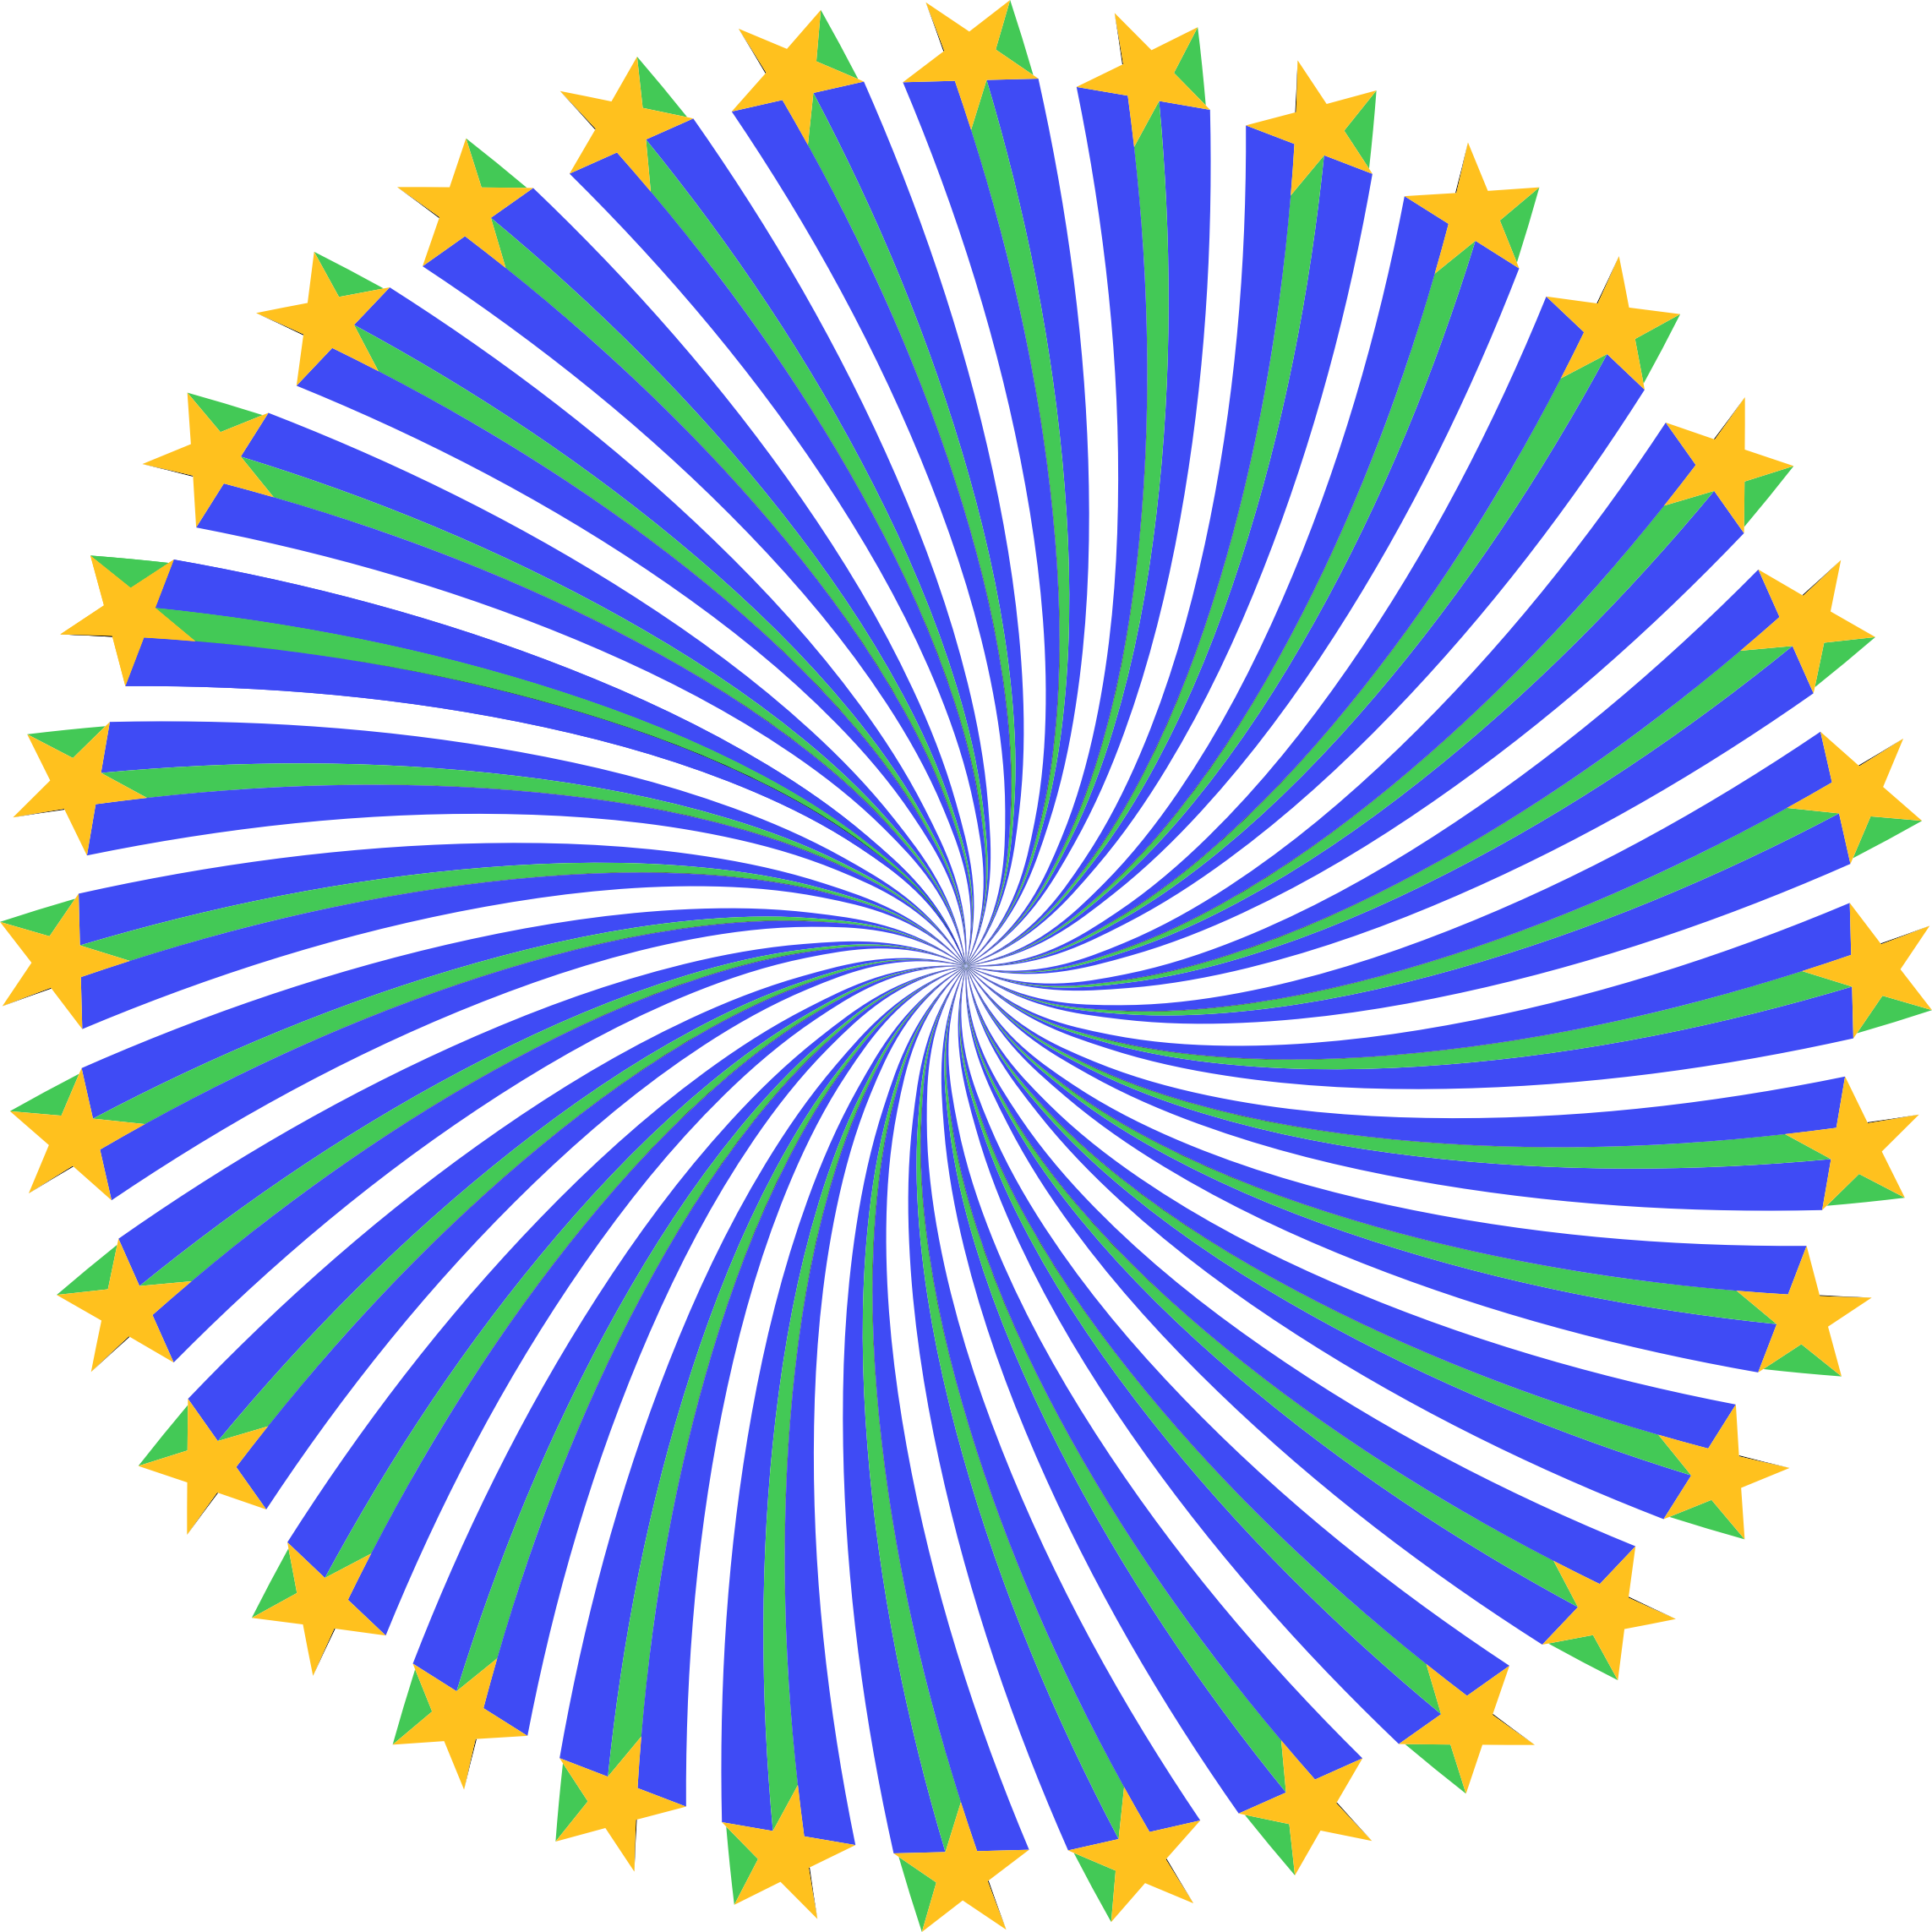 This Free Icons Png Design Of Starburst Vortex Mark - Hand Made Woolen Cover Plate (2286x2286)